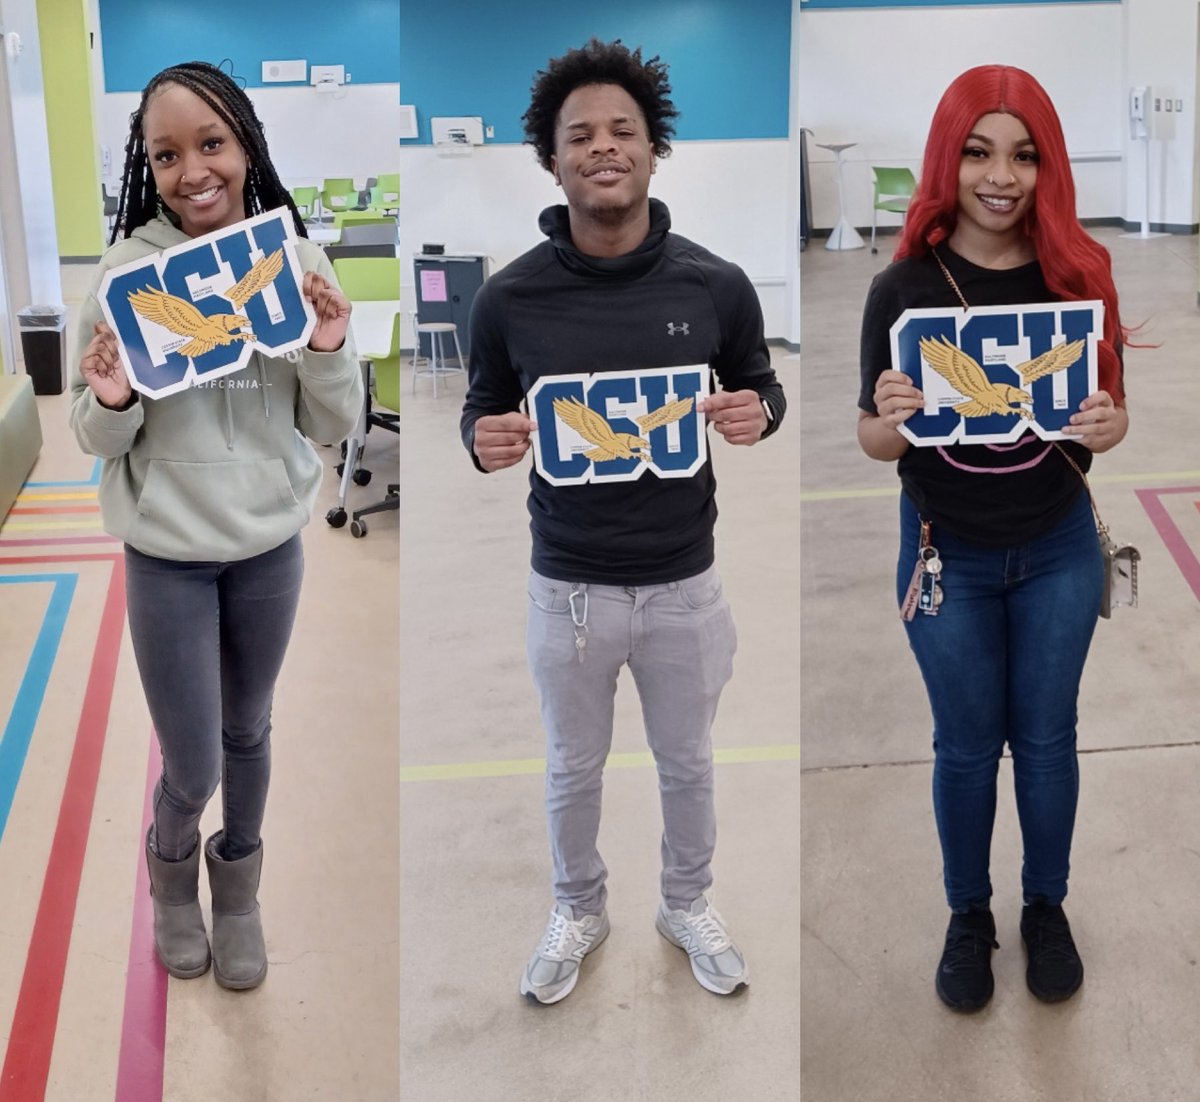 Congratulations to these @greenstreetacad students! Jayla, Kamontae and Alayna all received the Presidential Scholarship from @CoppinStateUniv! This is the highest merit award at the university 🦅